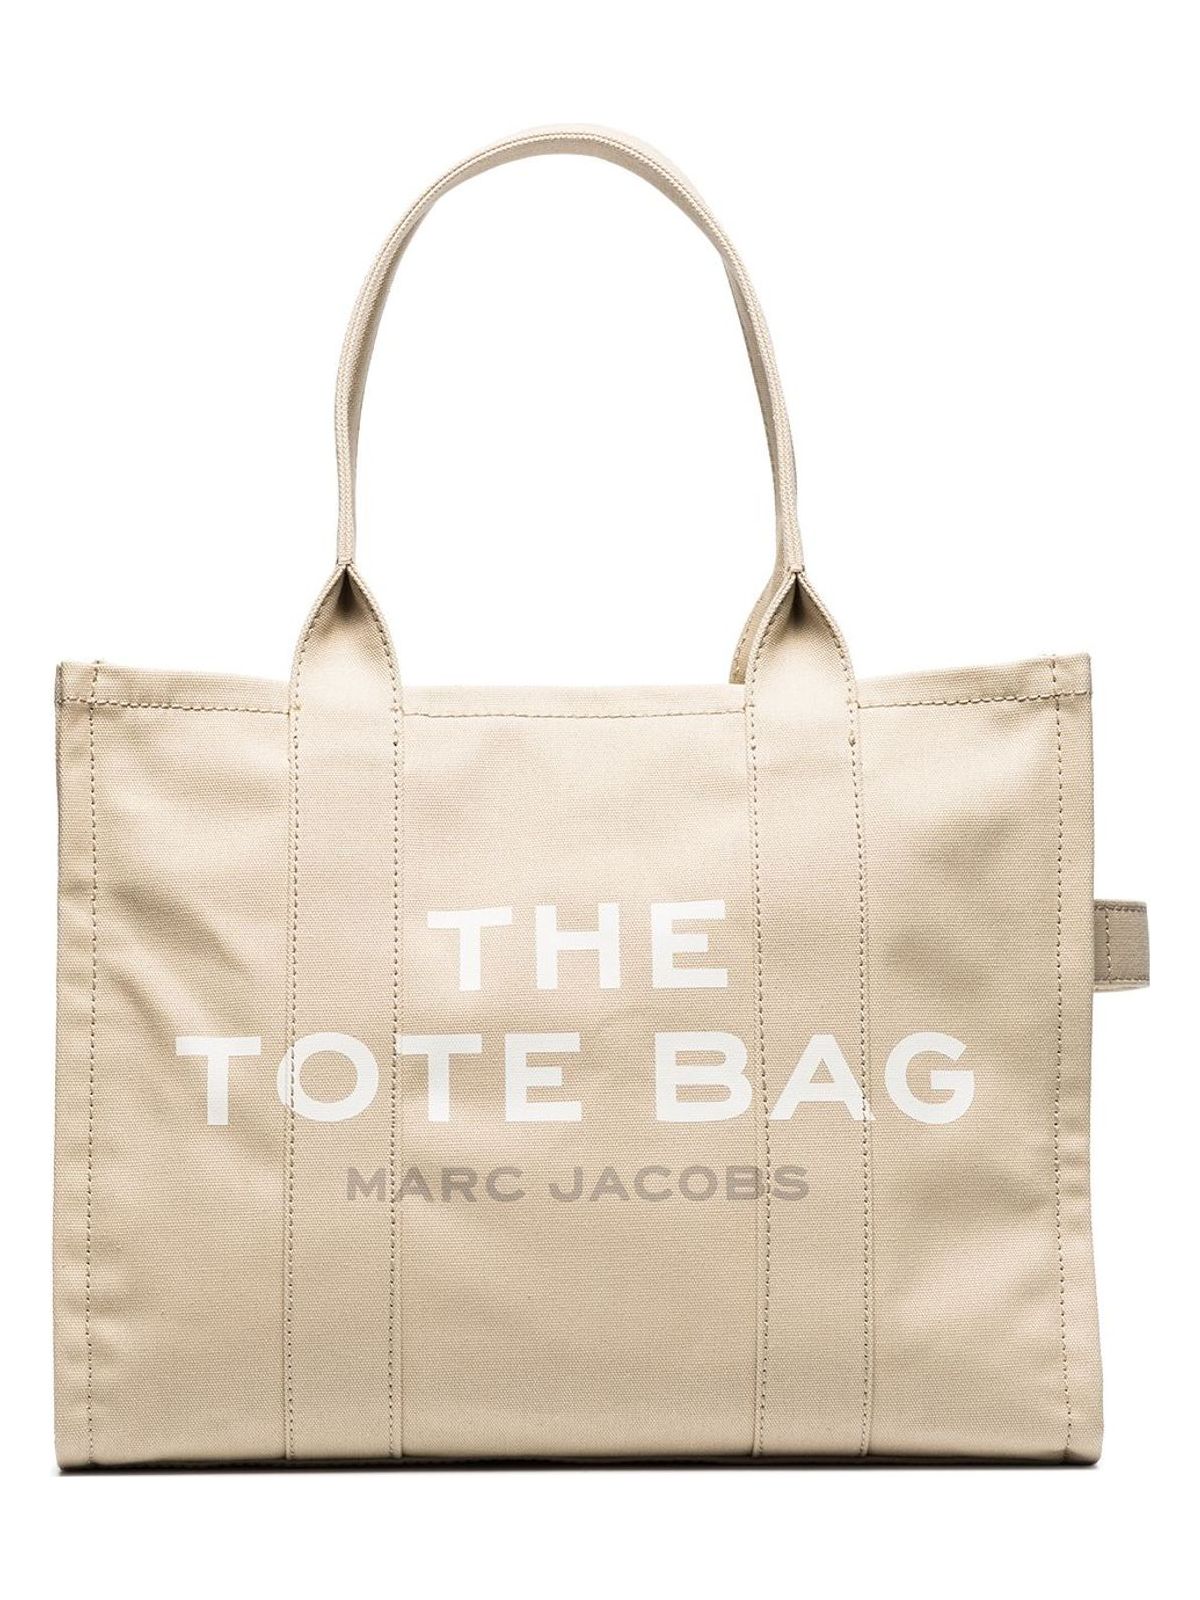 260 MARC JACOBS THE TOTE BAG